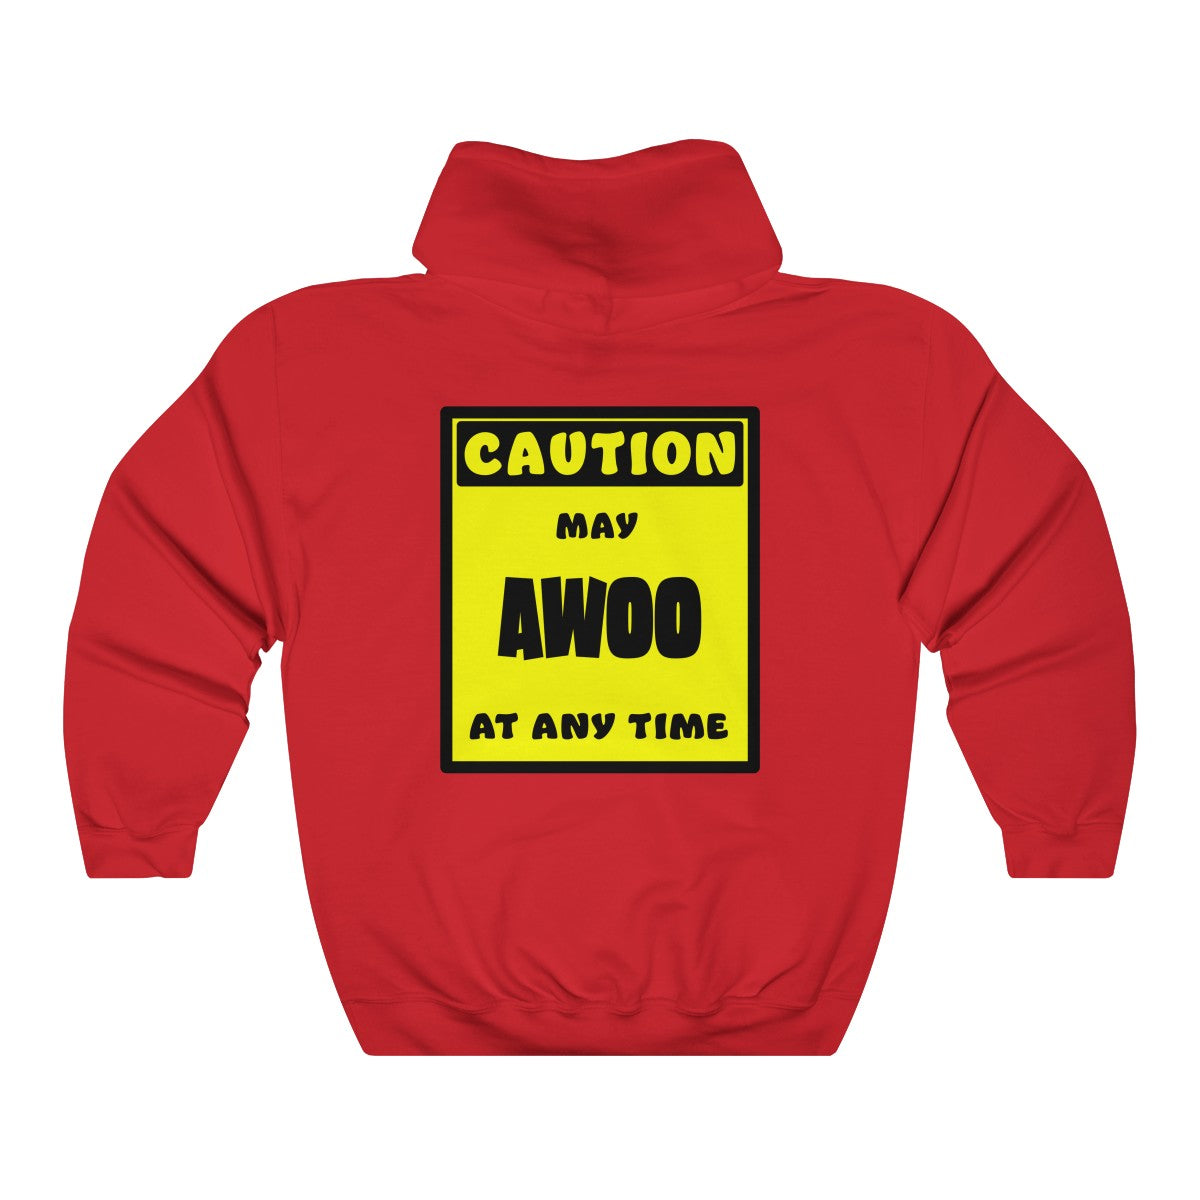 CAUTION! May AWOO at any time! - Hoodie Hoodie AFLT-Whootorca Red S 